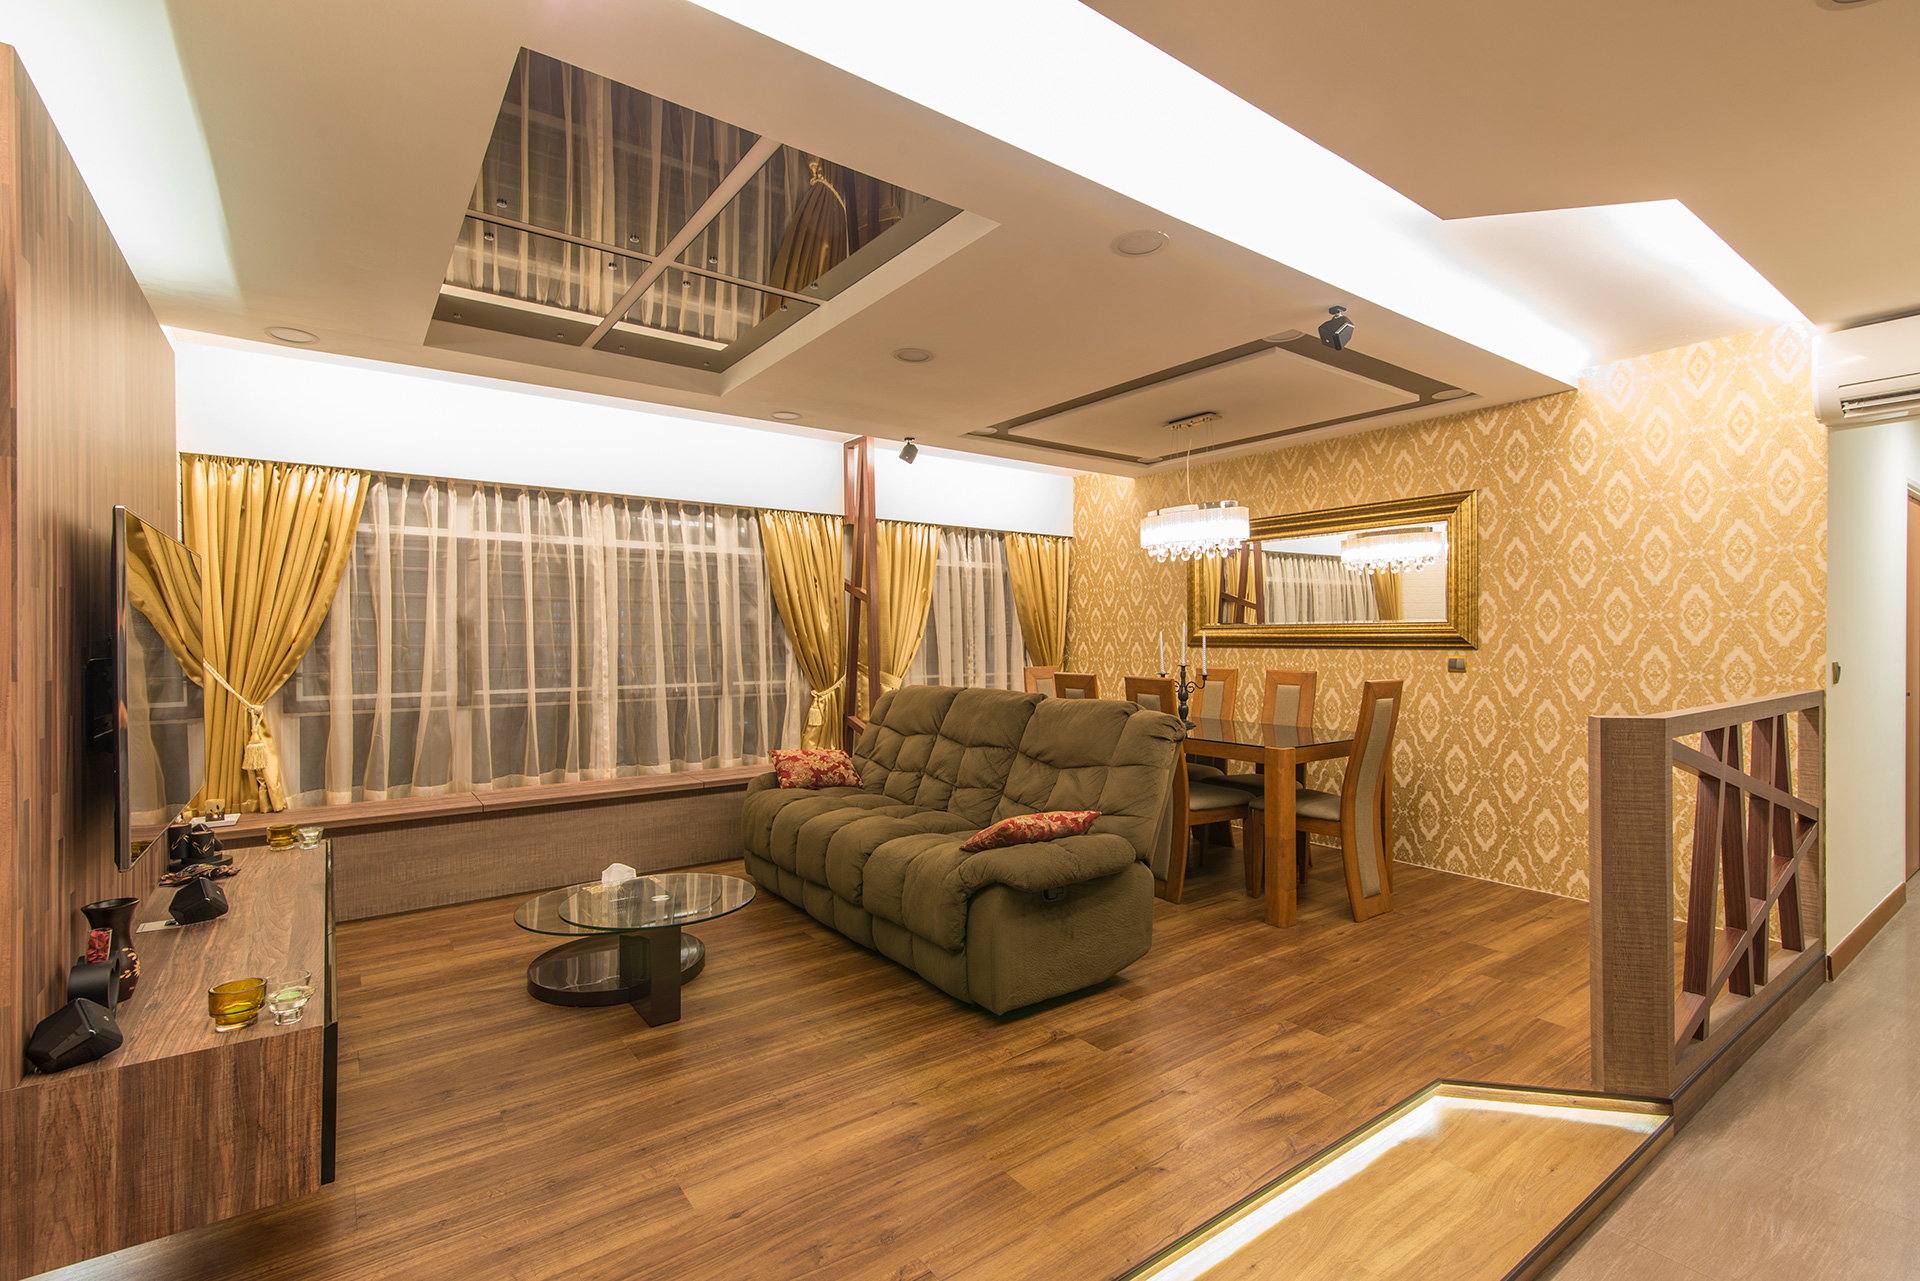 Country, Rustic Design - Living Room - HDB 5 Room - Design by Ideal Design Interior Pte Ltd